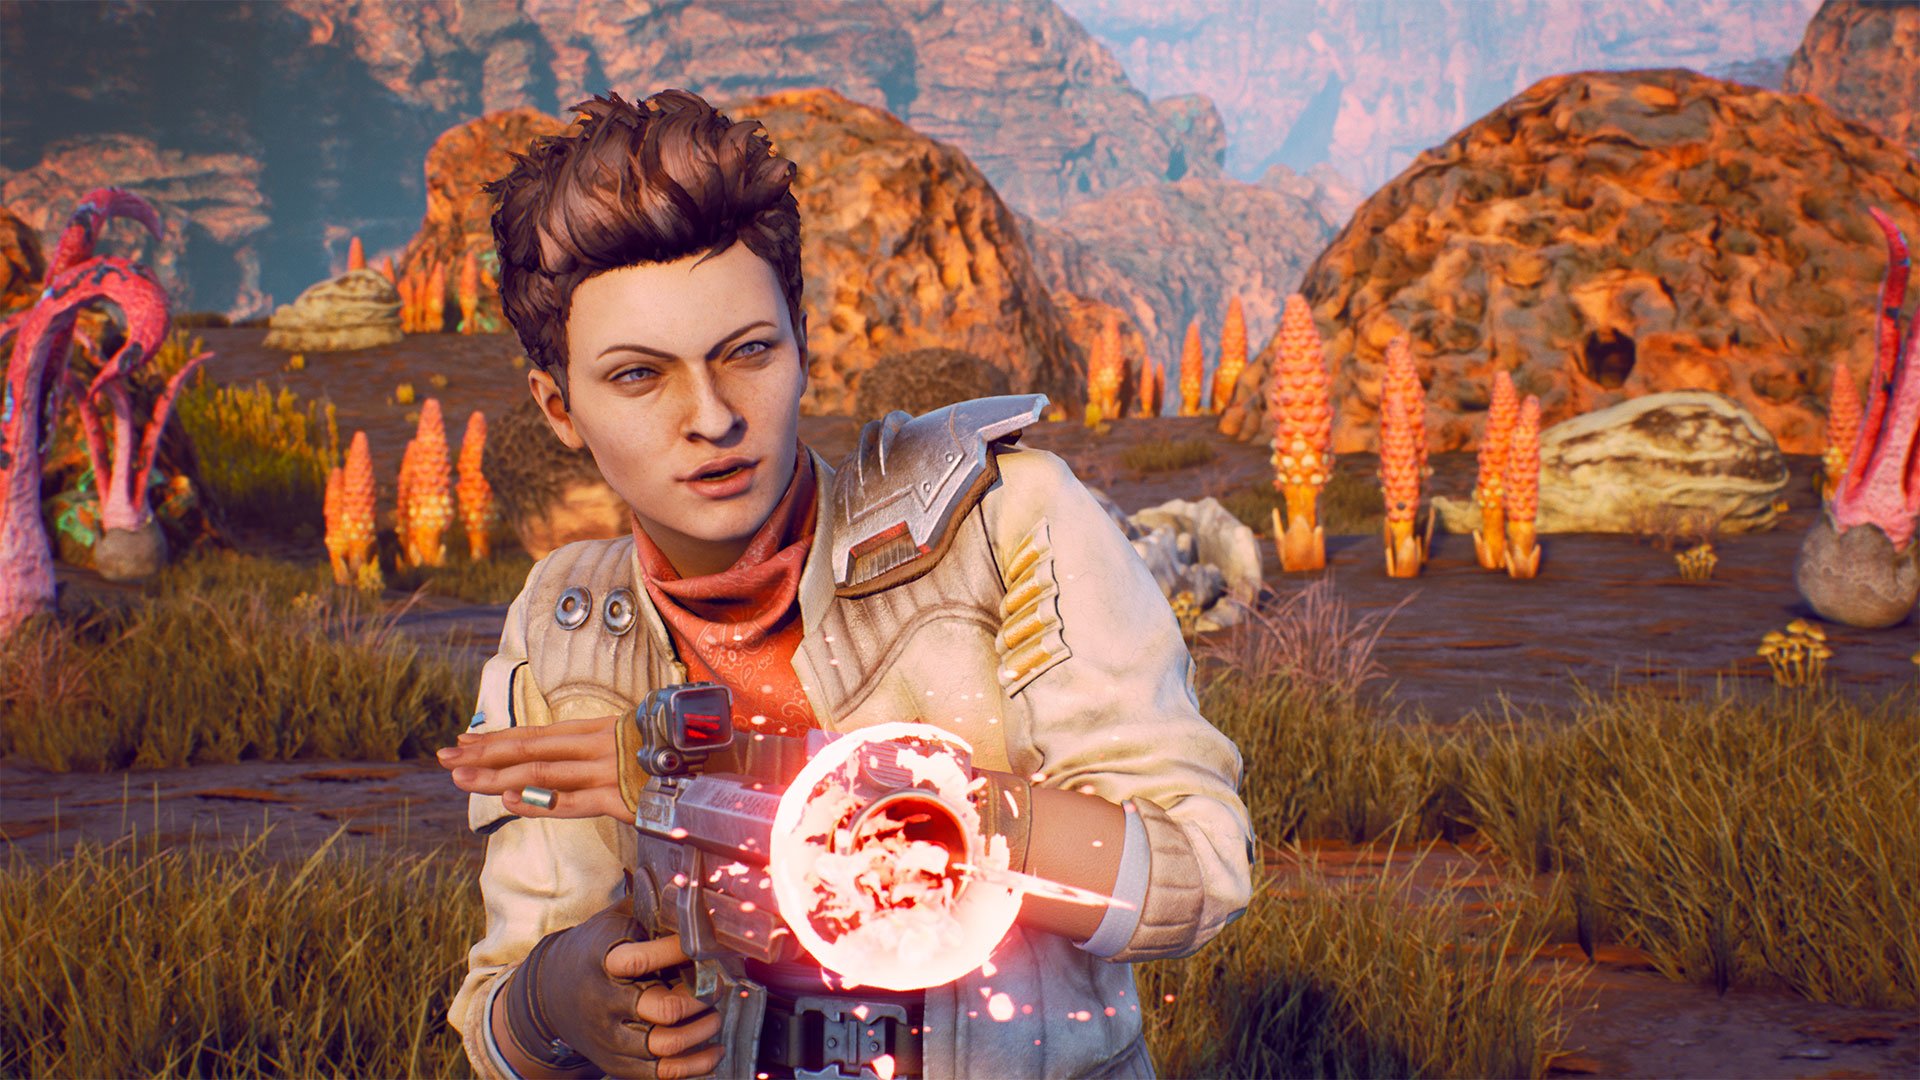 One of the companions from The Outer Worlds, Ellie.